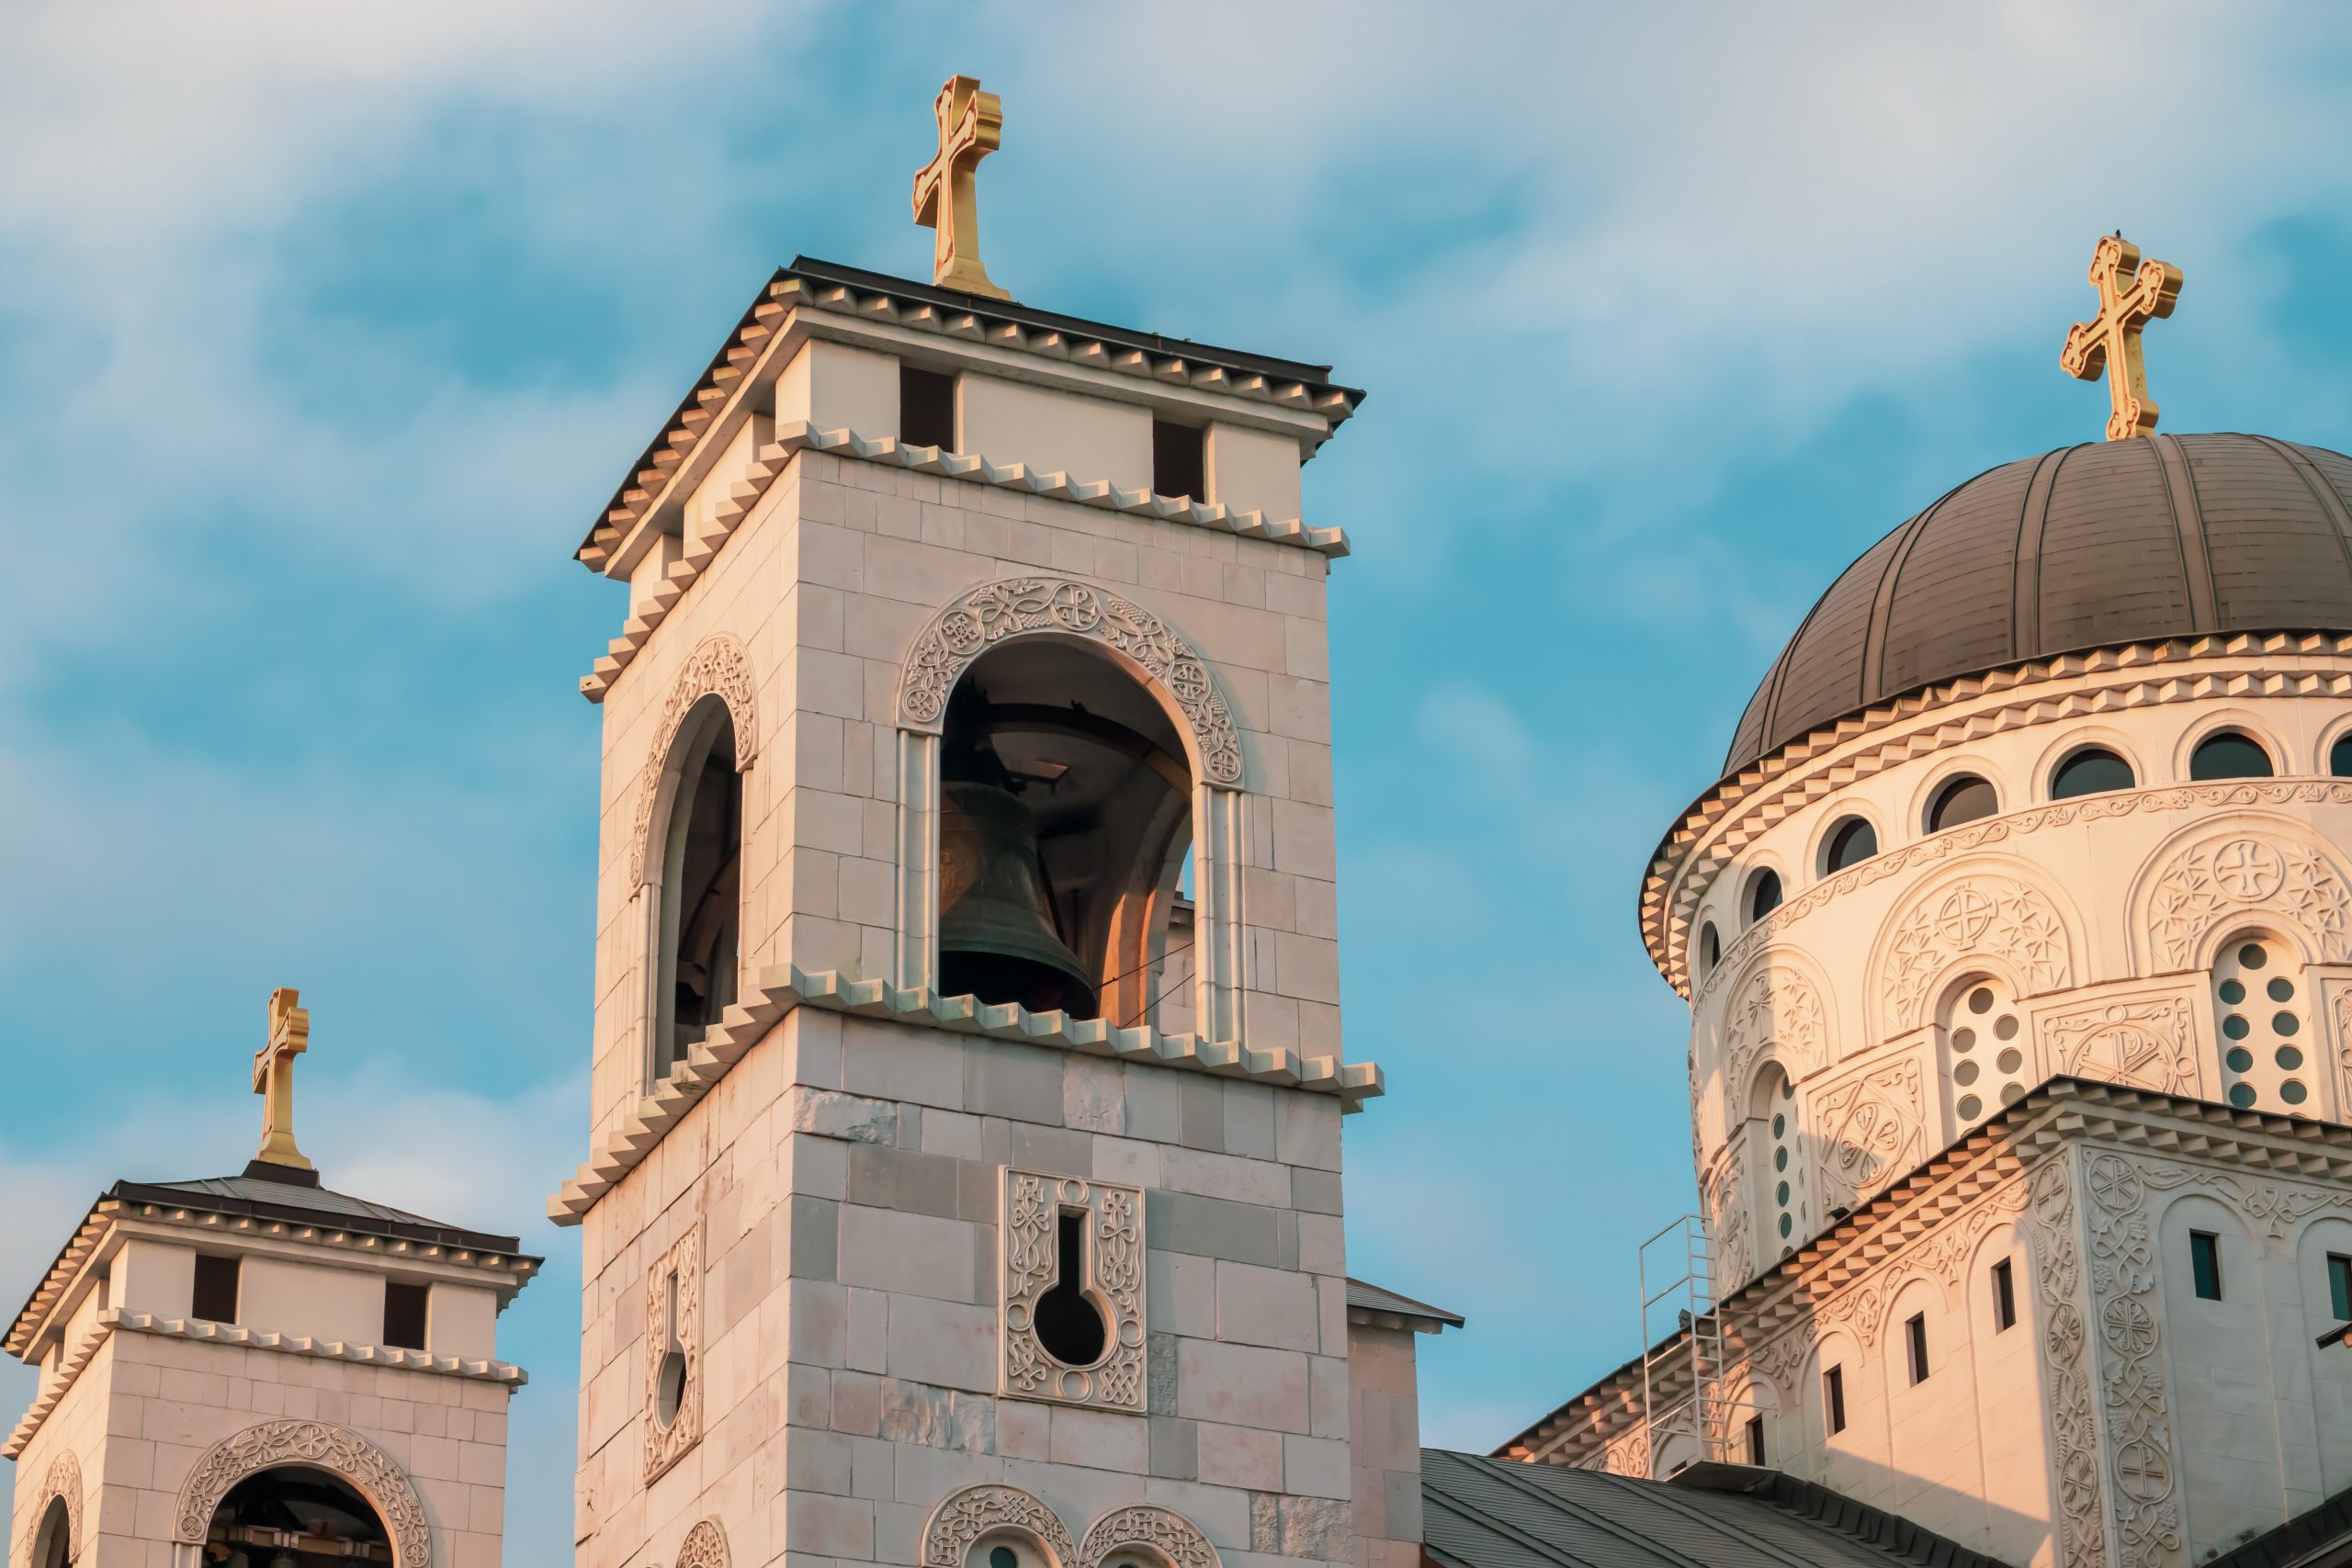 The church bell towers of Podgorica in the magic hour.